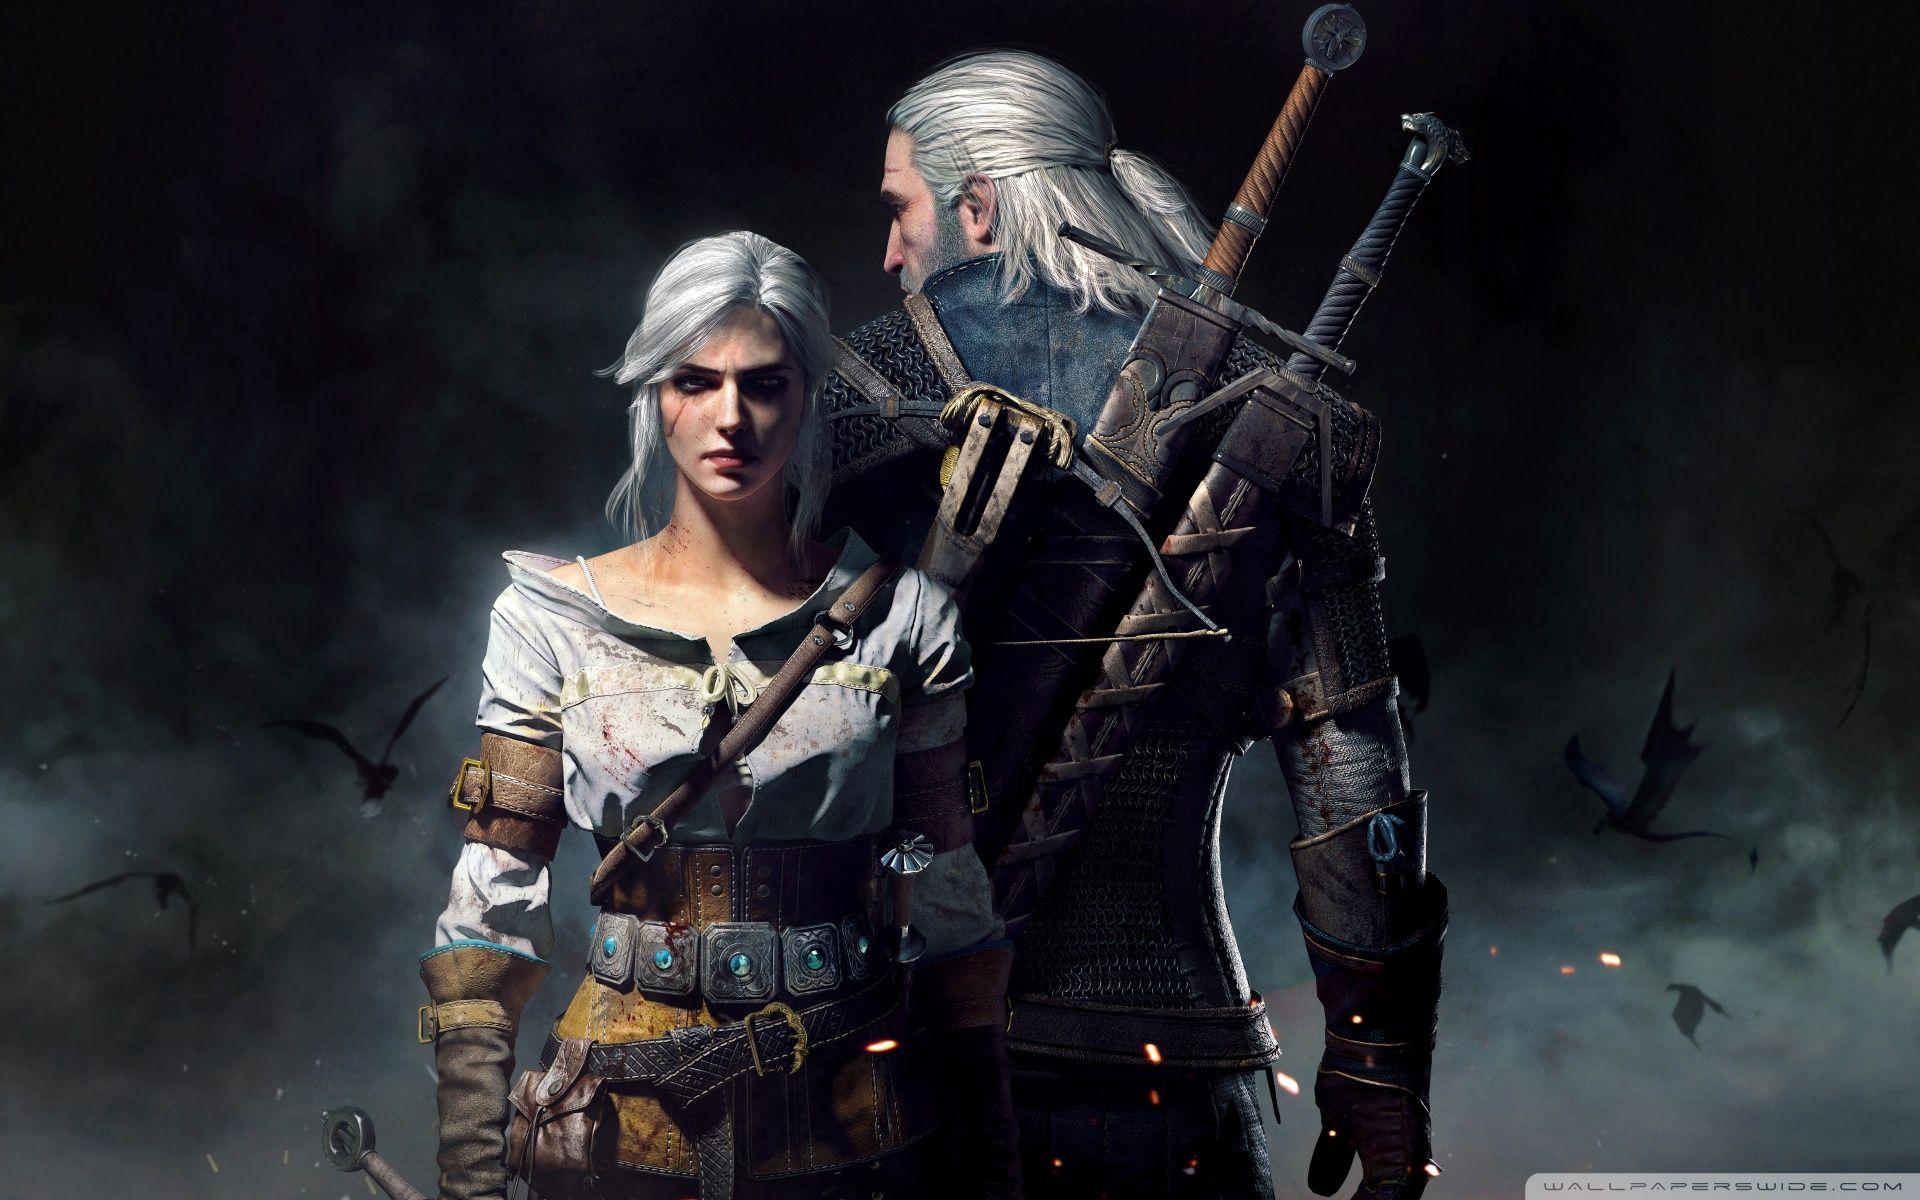 Witcher 3 Ciri Wallpapers